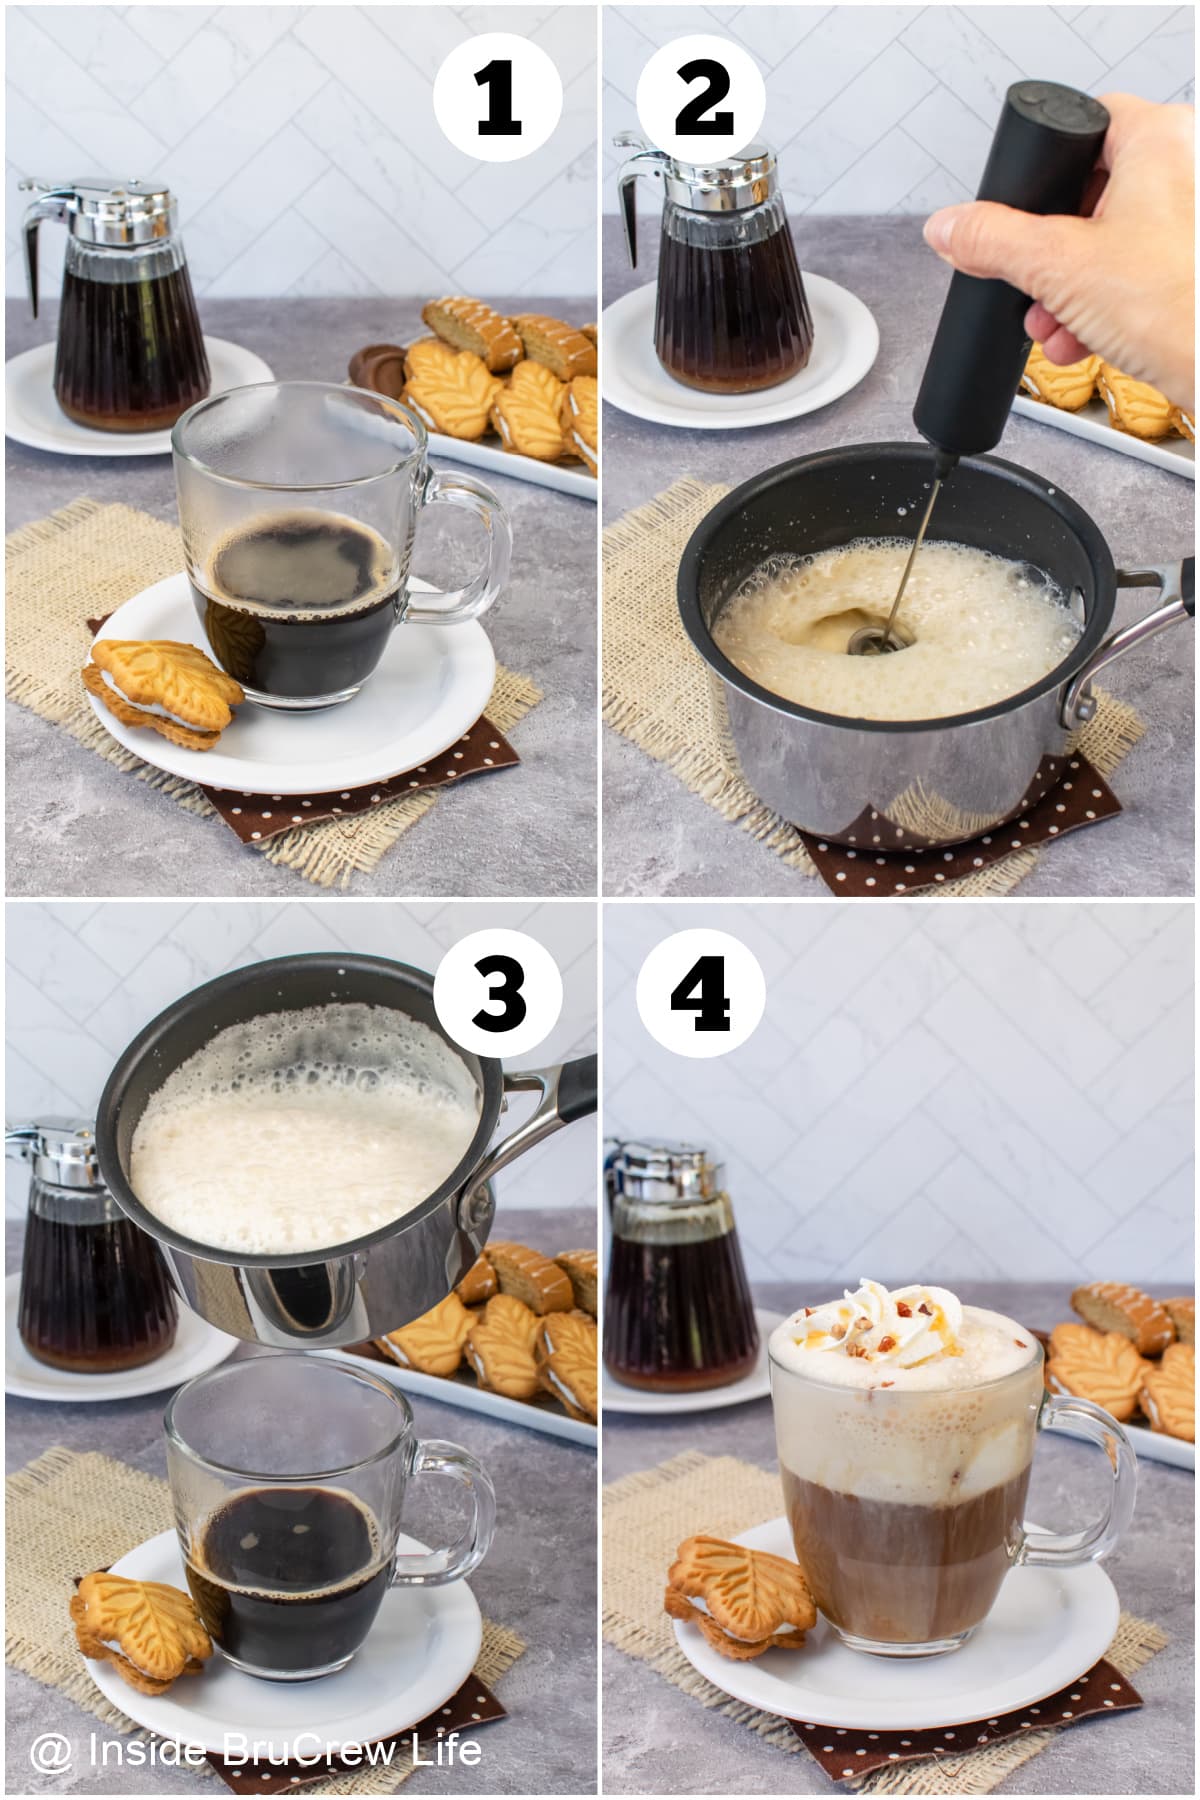 Four pictures collaged together showing how to make a homemade coffee drink.